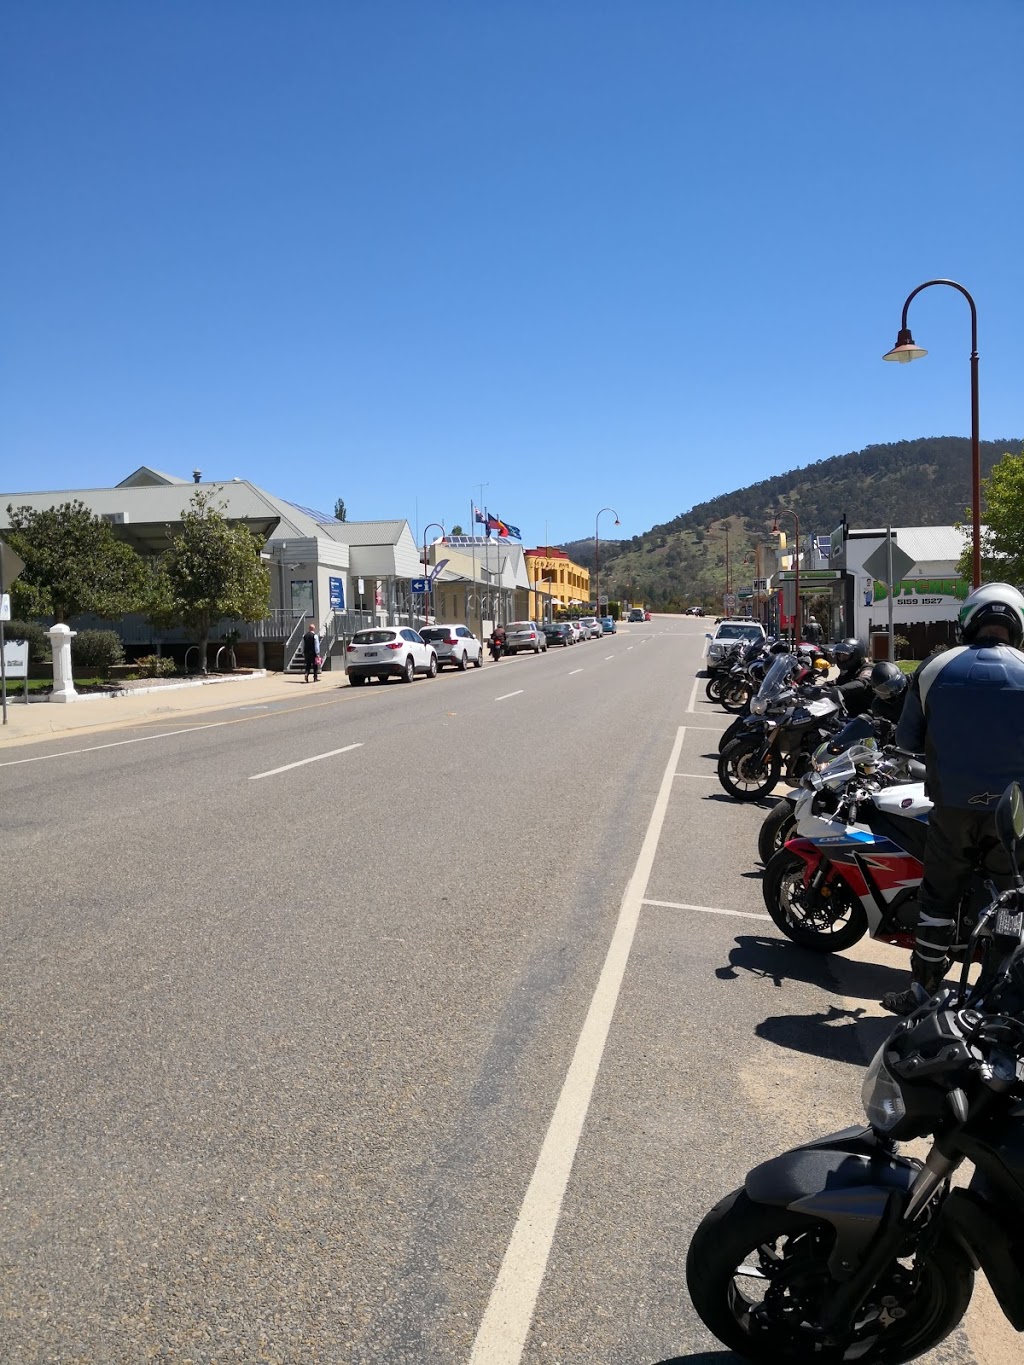 Omeo Ski Hire & Service Station | gas station | 196 Day Ave, Omeo VIC 3898, Australia | 0351591600 OR +61 3 5159 1600